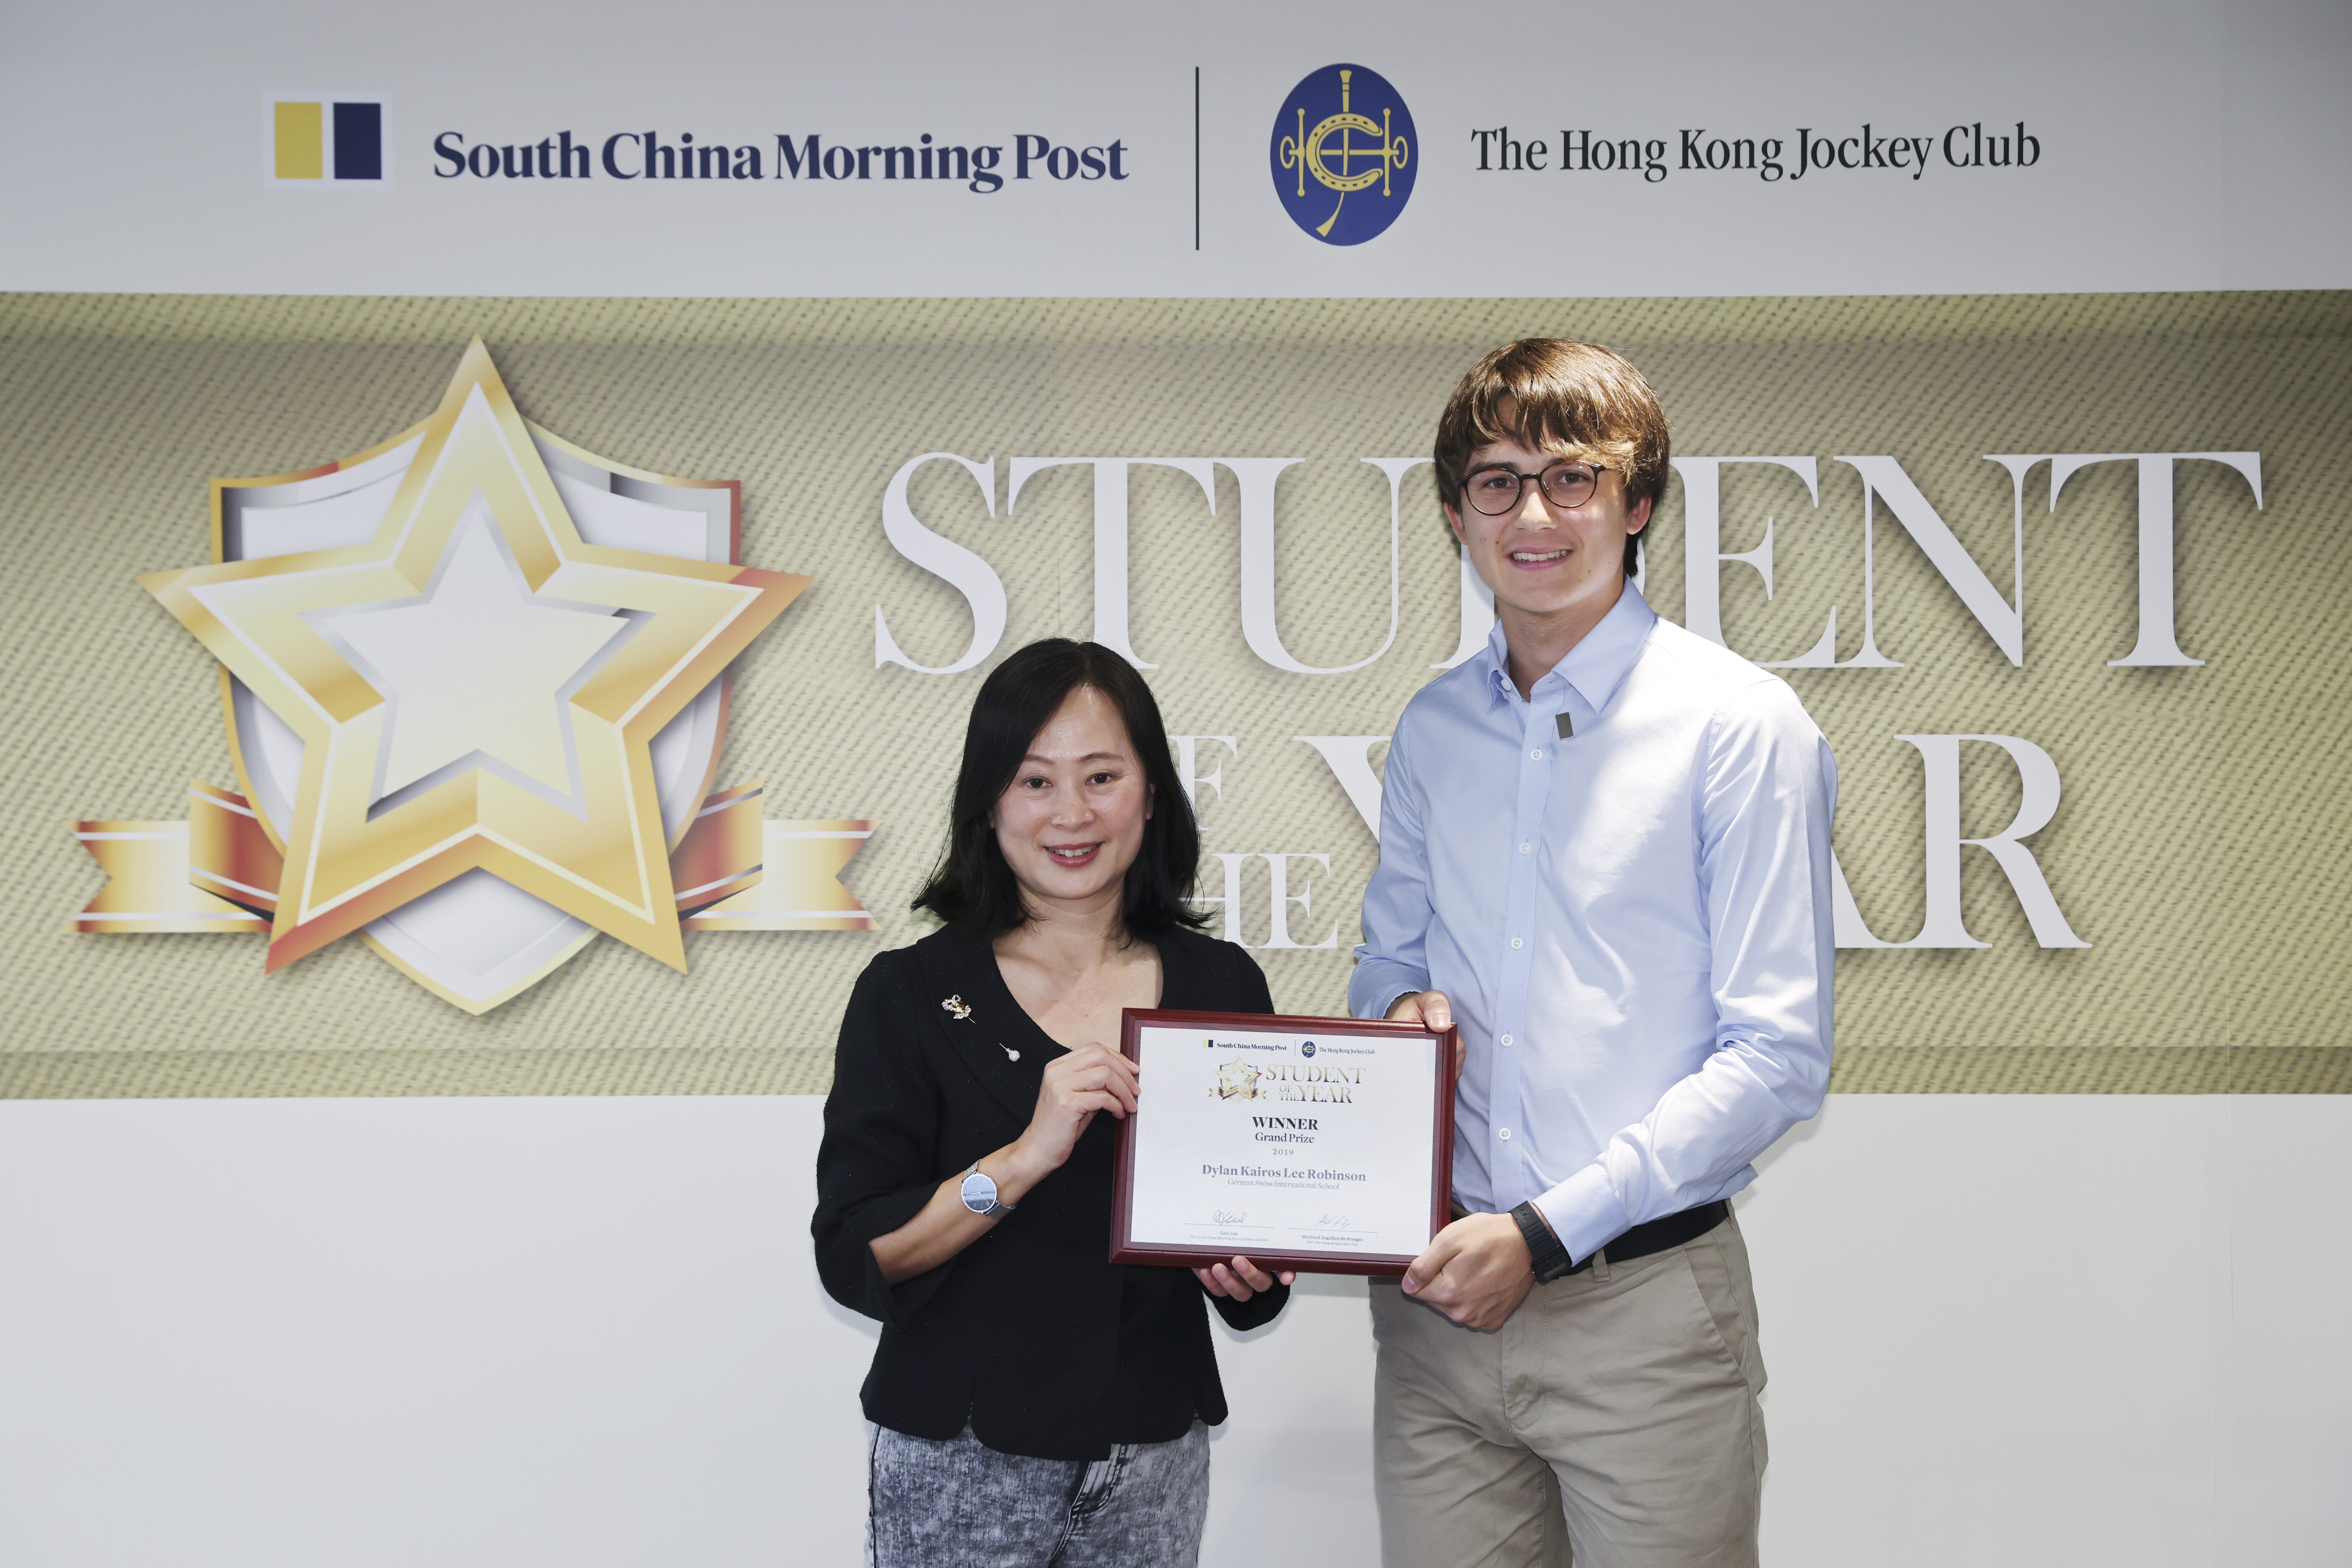 Tammy Tam, the Post’s editor-in-chief (left) and Student of Year Awards Grand Prize winner Dylan Robinson. Photo: Nora Tam